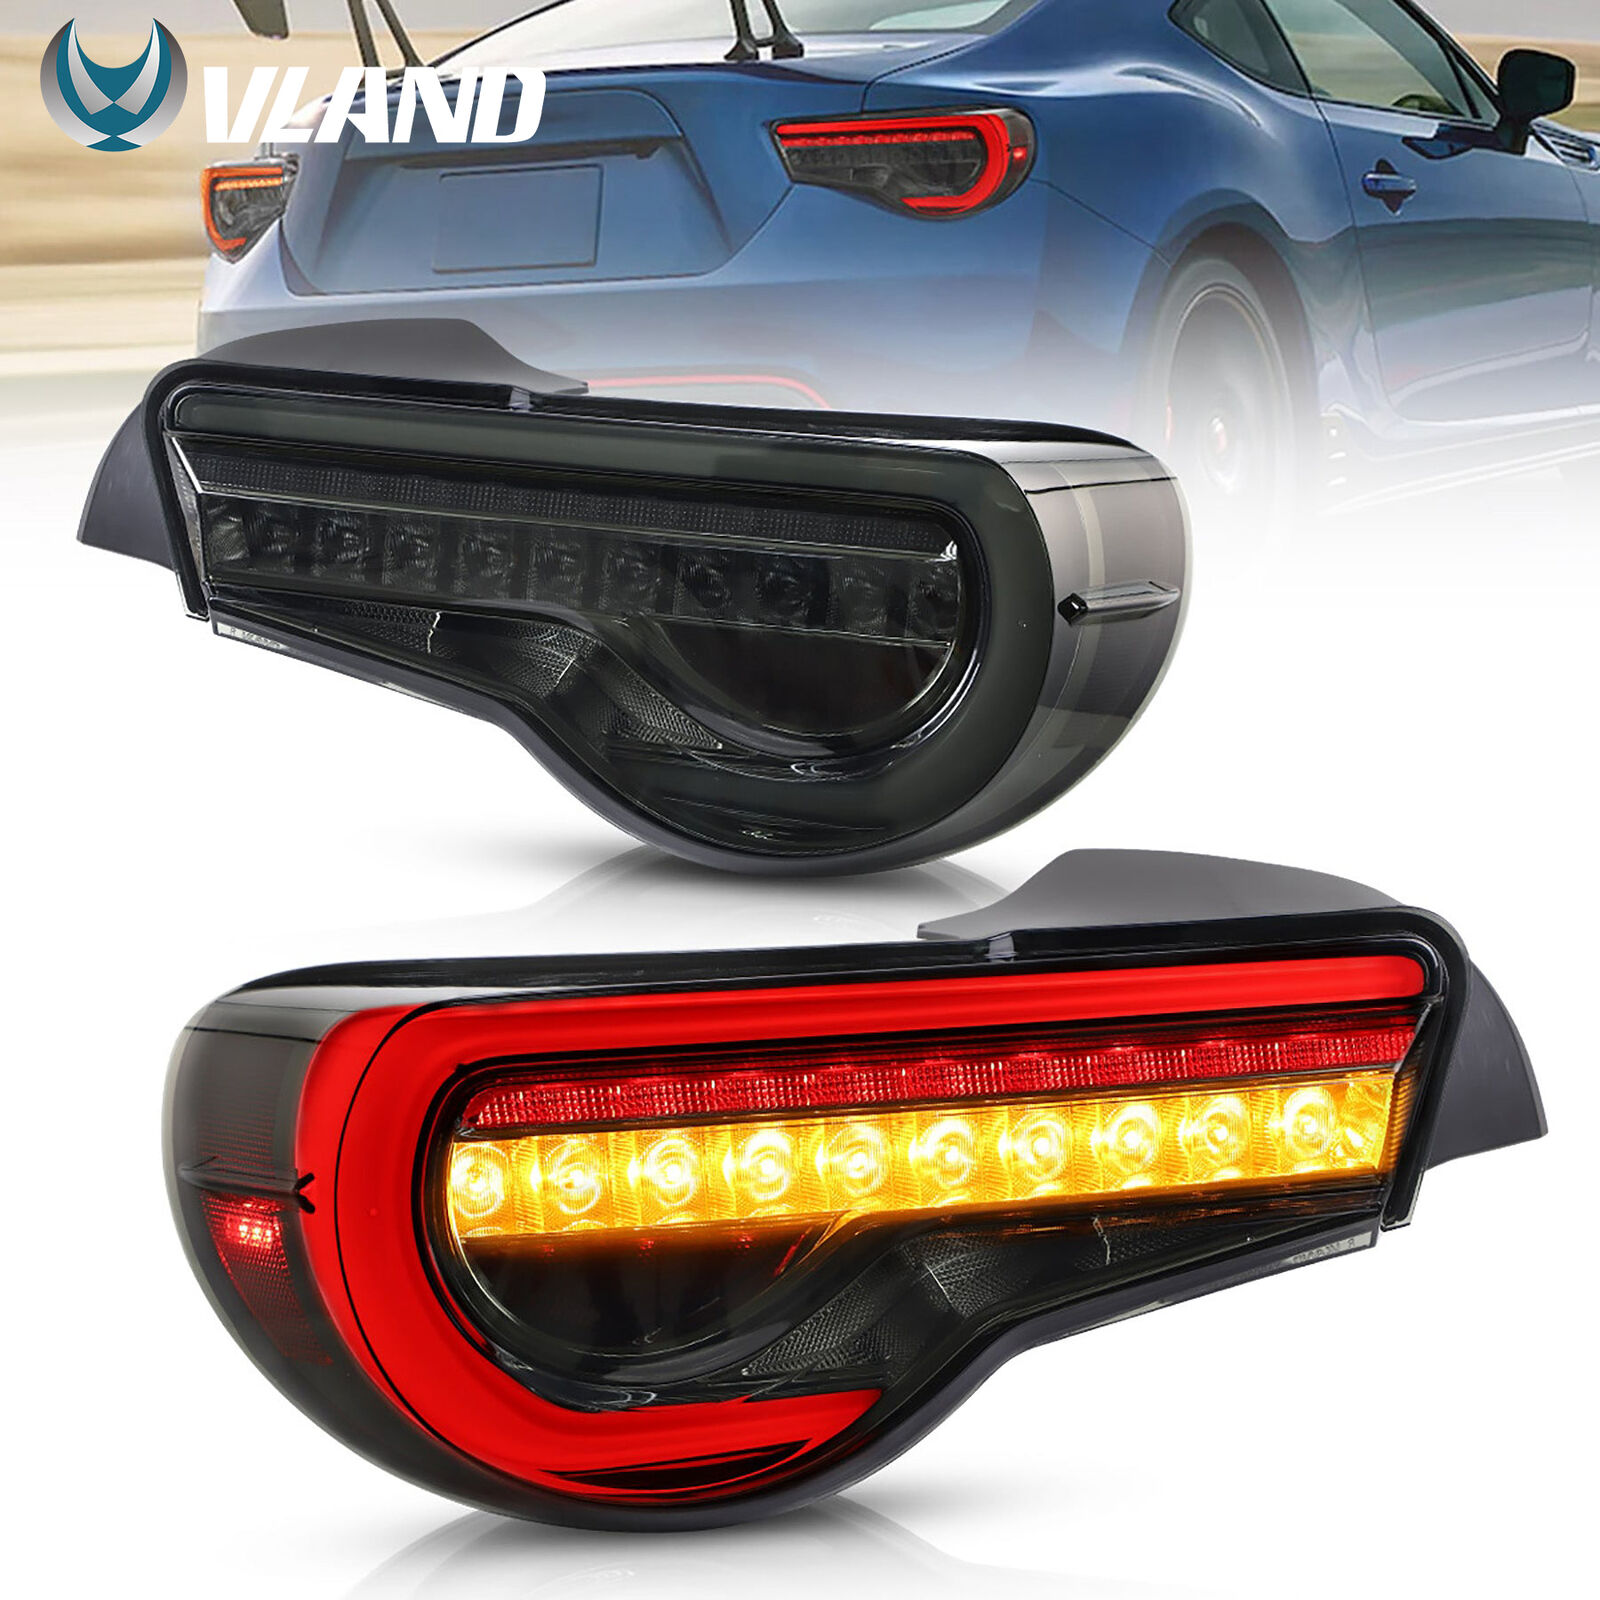 VLAND LED Tail Lights For 13-20 Toyota 86 Subaru BRZ Scion FR-S Sequential Lamps